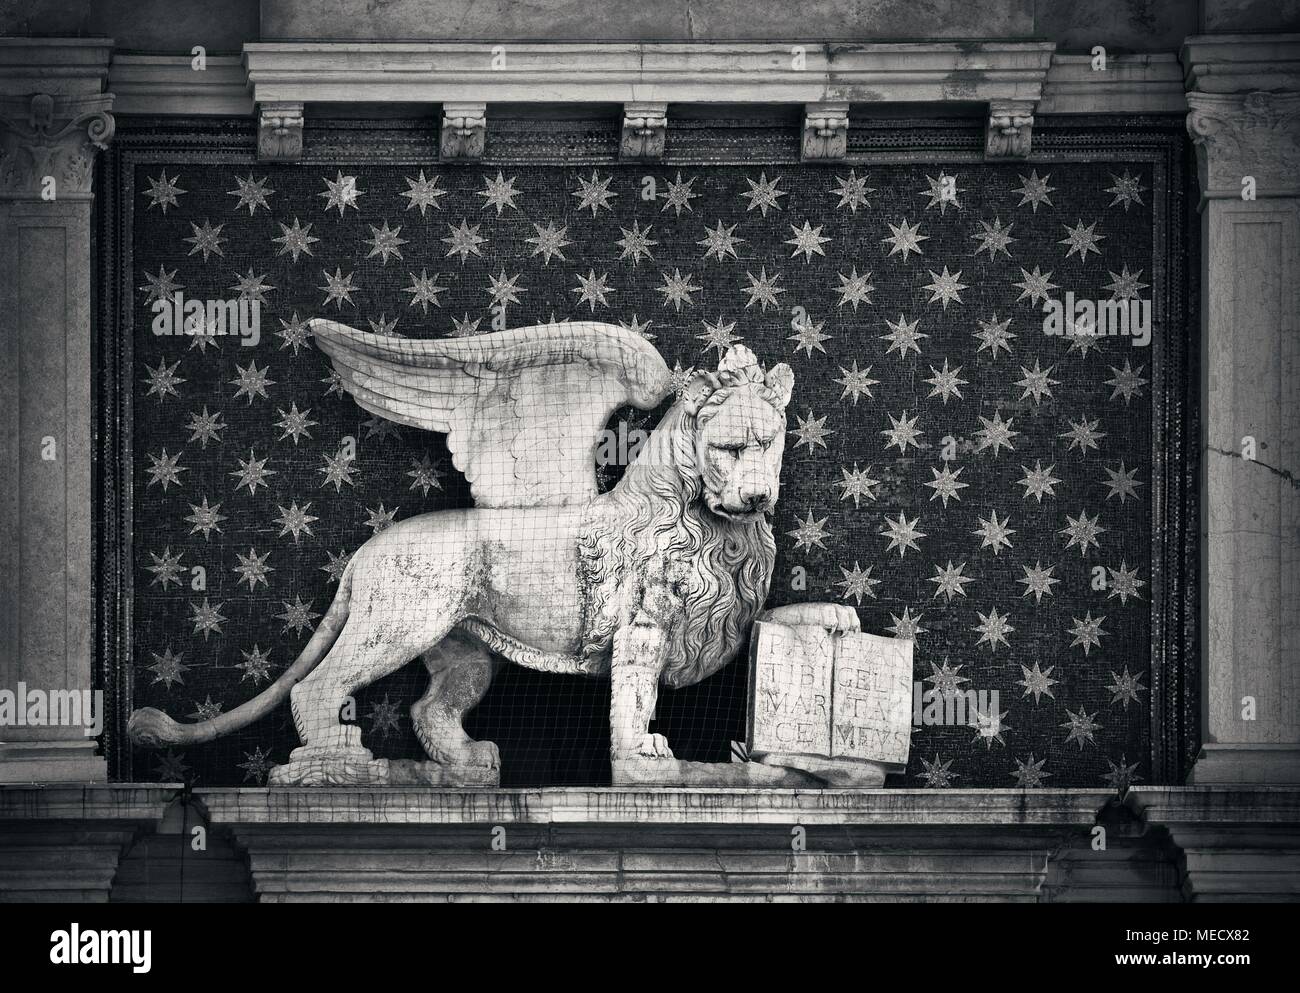 Lion of Venice statue in historical buildings at Piazza San Marco, Italy. Stock Photo